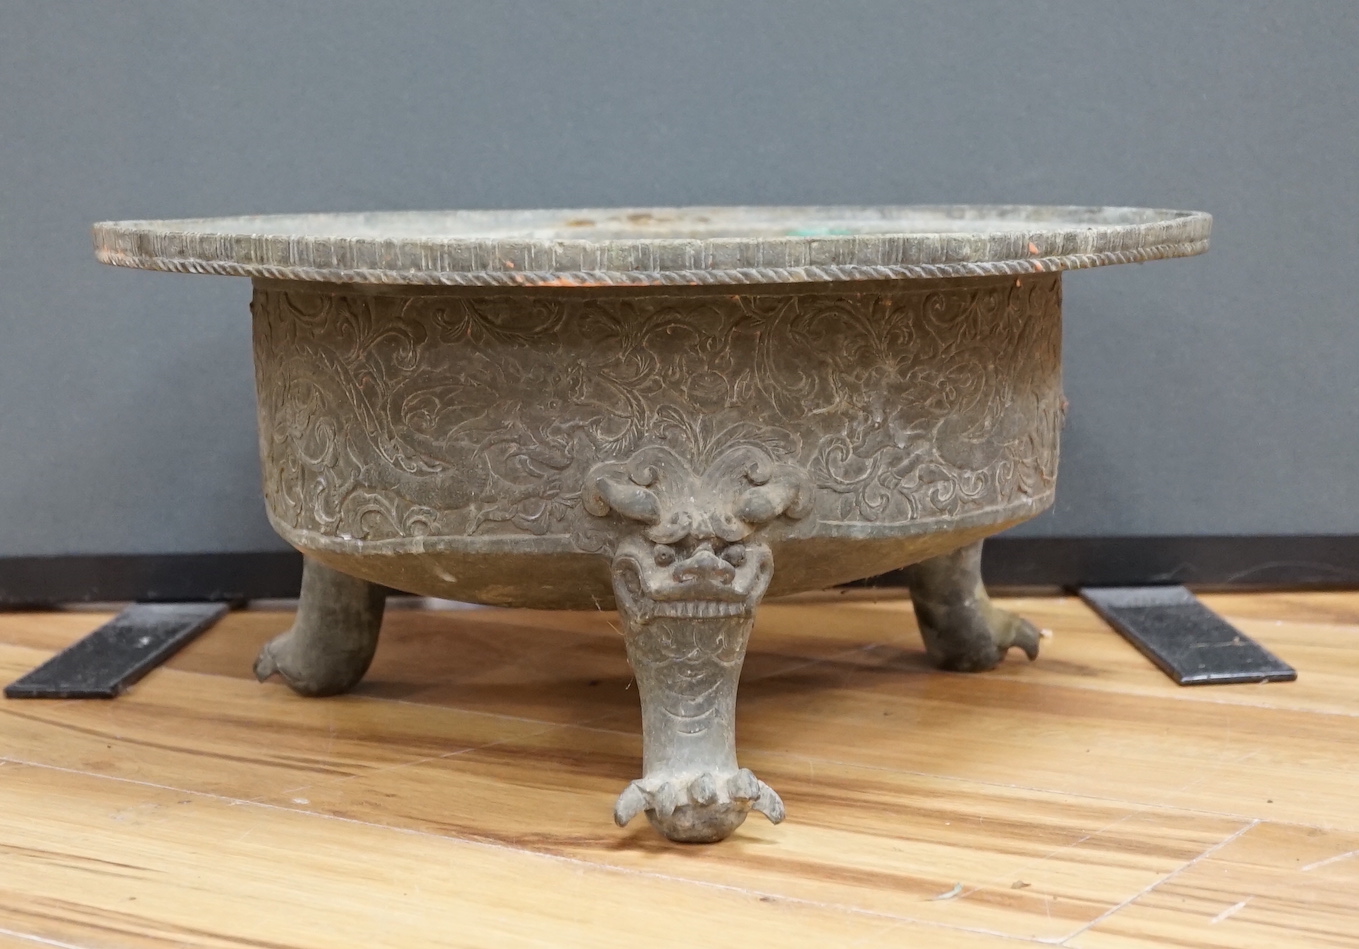 A large and heavy Chinese bronze tripod basin, Xuande mark but 19th century, the broad rim cast in relief with lions, brocaded balls and ribbons, the sides with dragons chasing flaming pearls, on three mythical beast hea